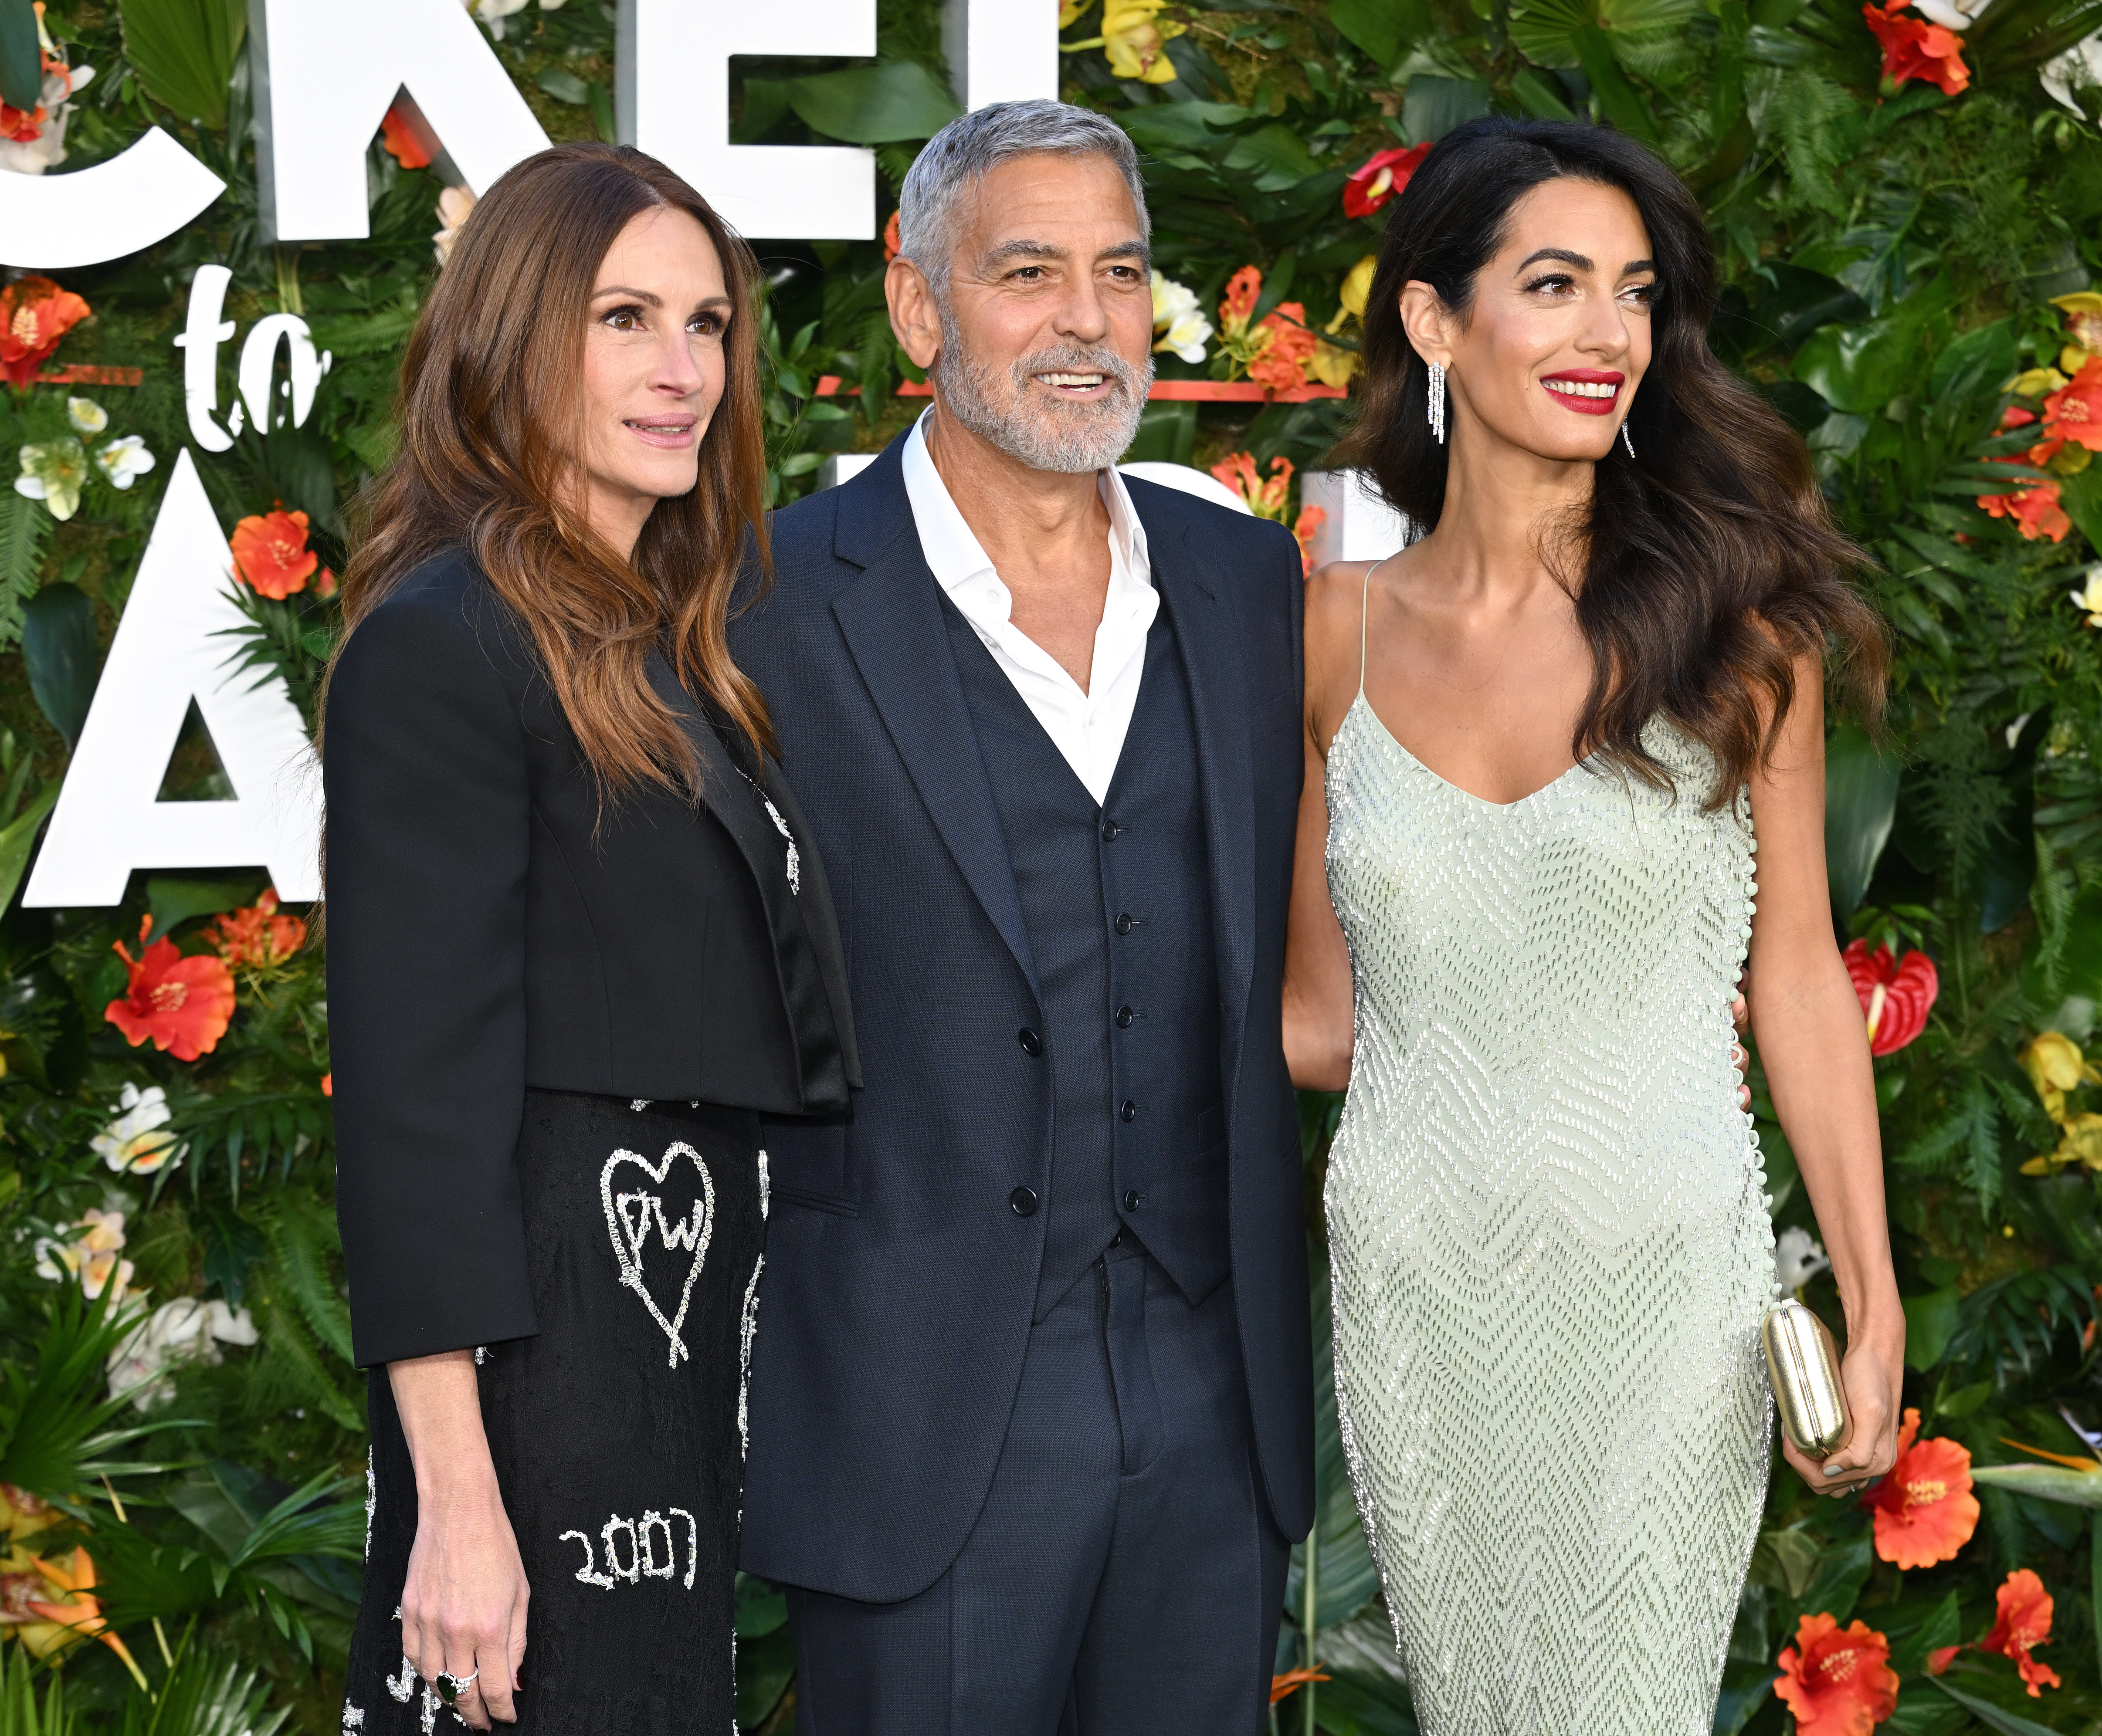 Julia Roberts with her friends, Amal Clooney and George Clooney, at the "Ticket to Paradise" world premiere, Odeon Luxe Leicester Square, London, England, on September 07, 2022 | Source: Getty Images